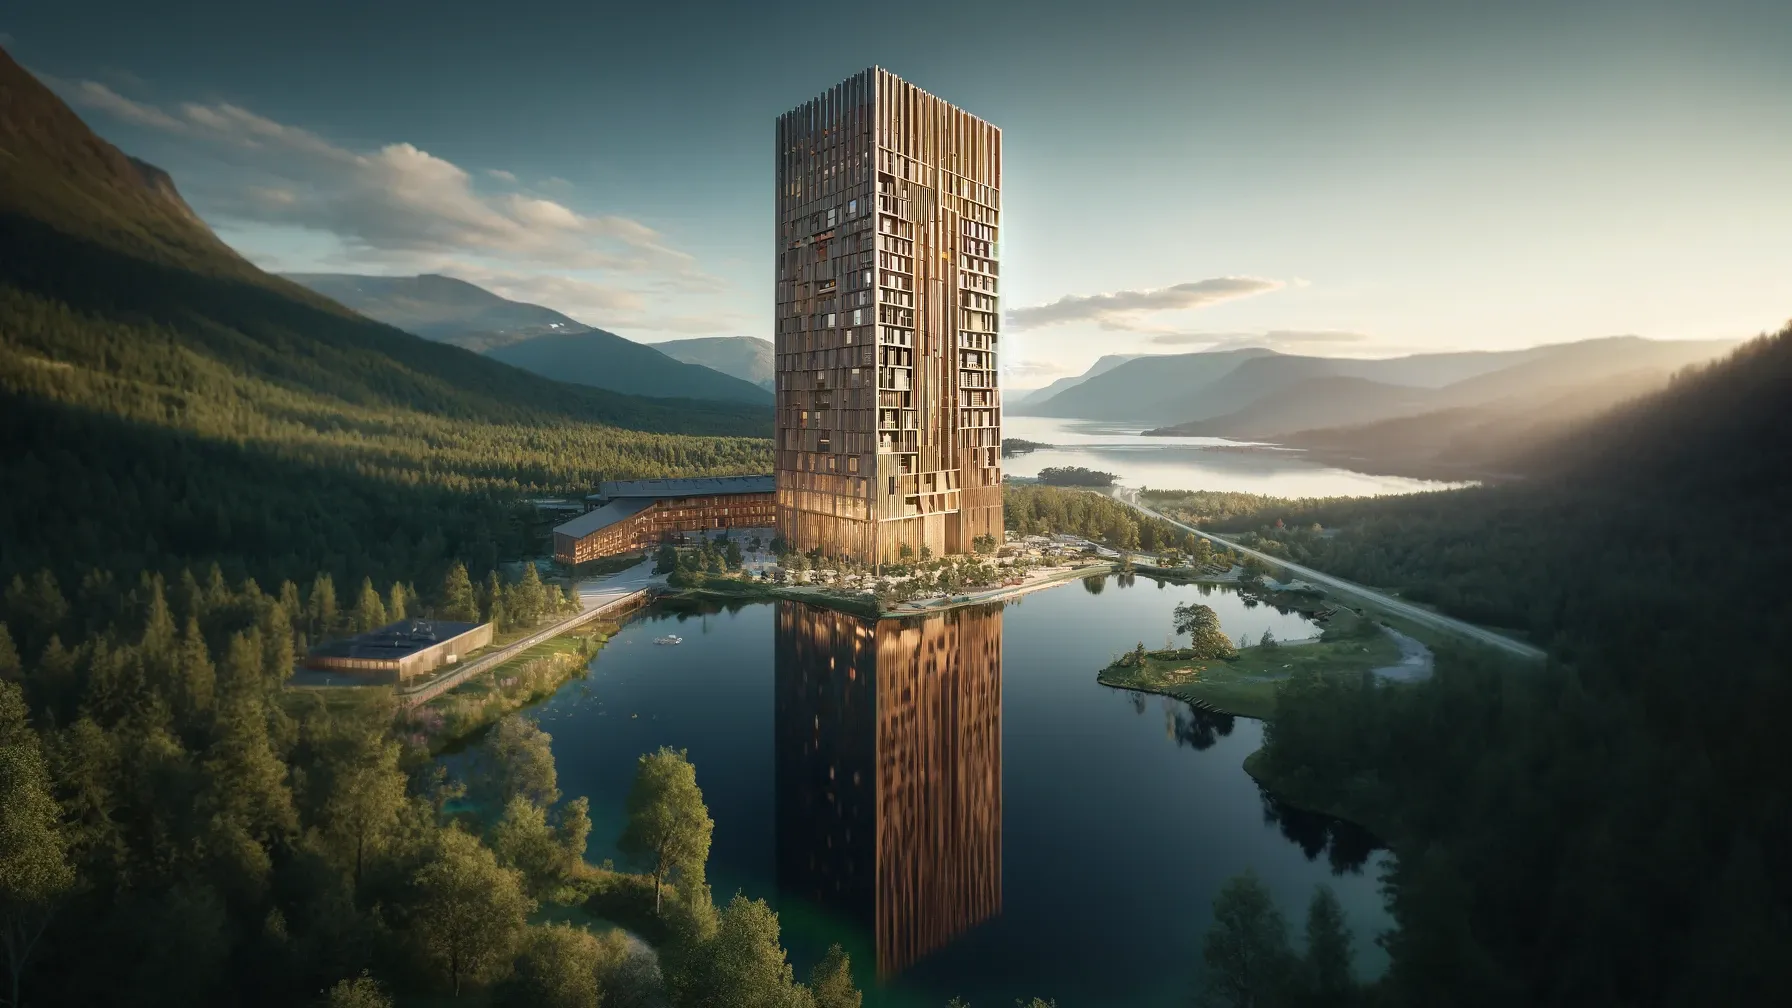 A detailed view of Mjøstårnet, the world's tallest timber building